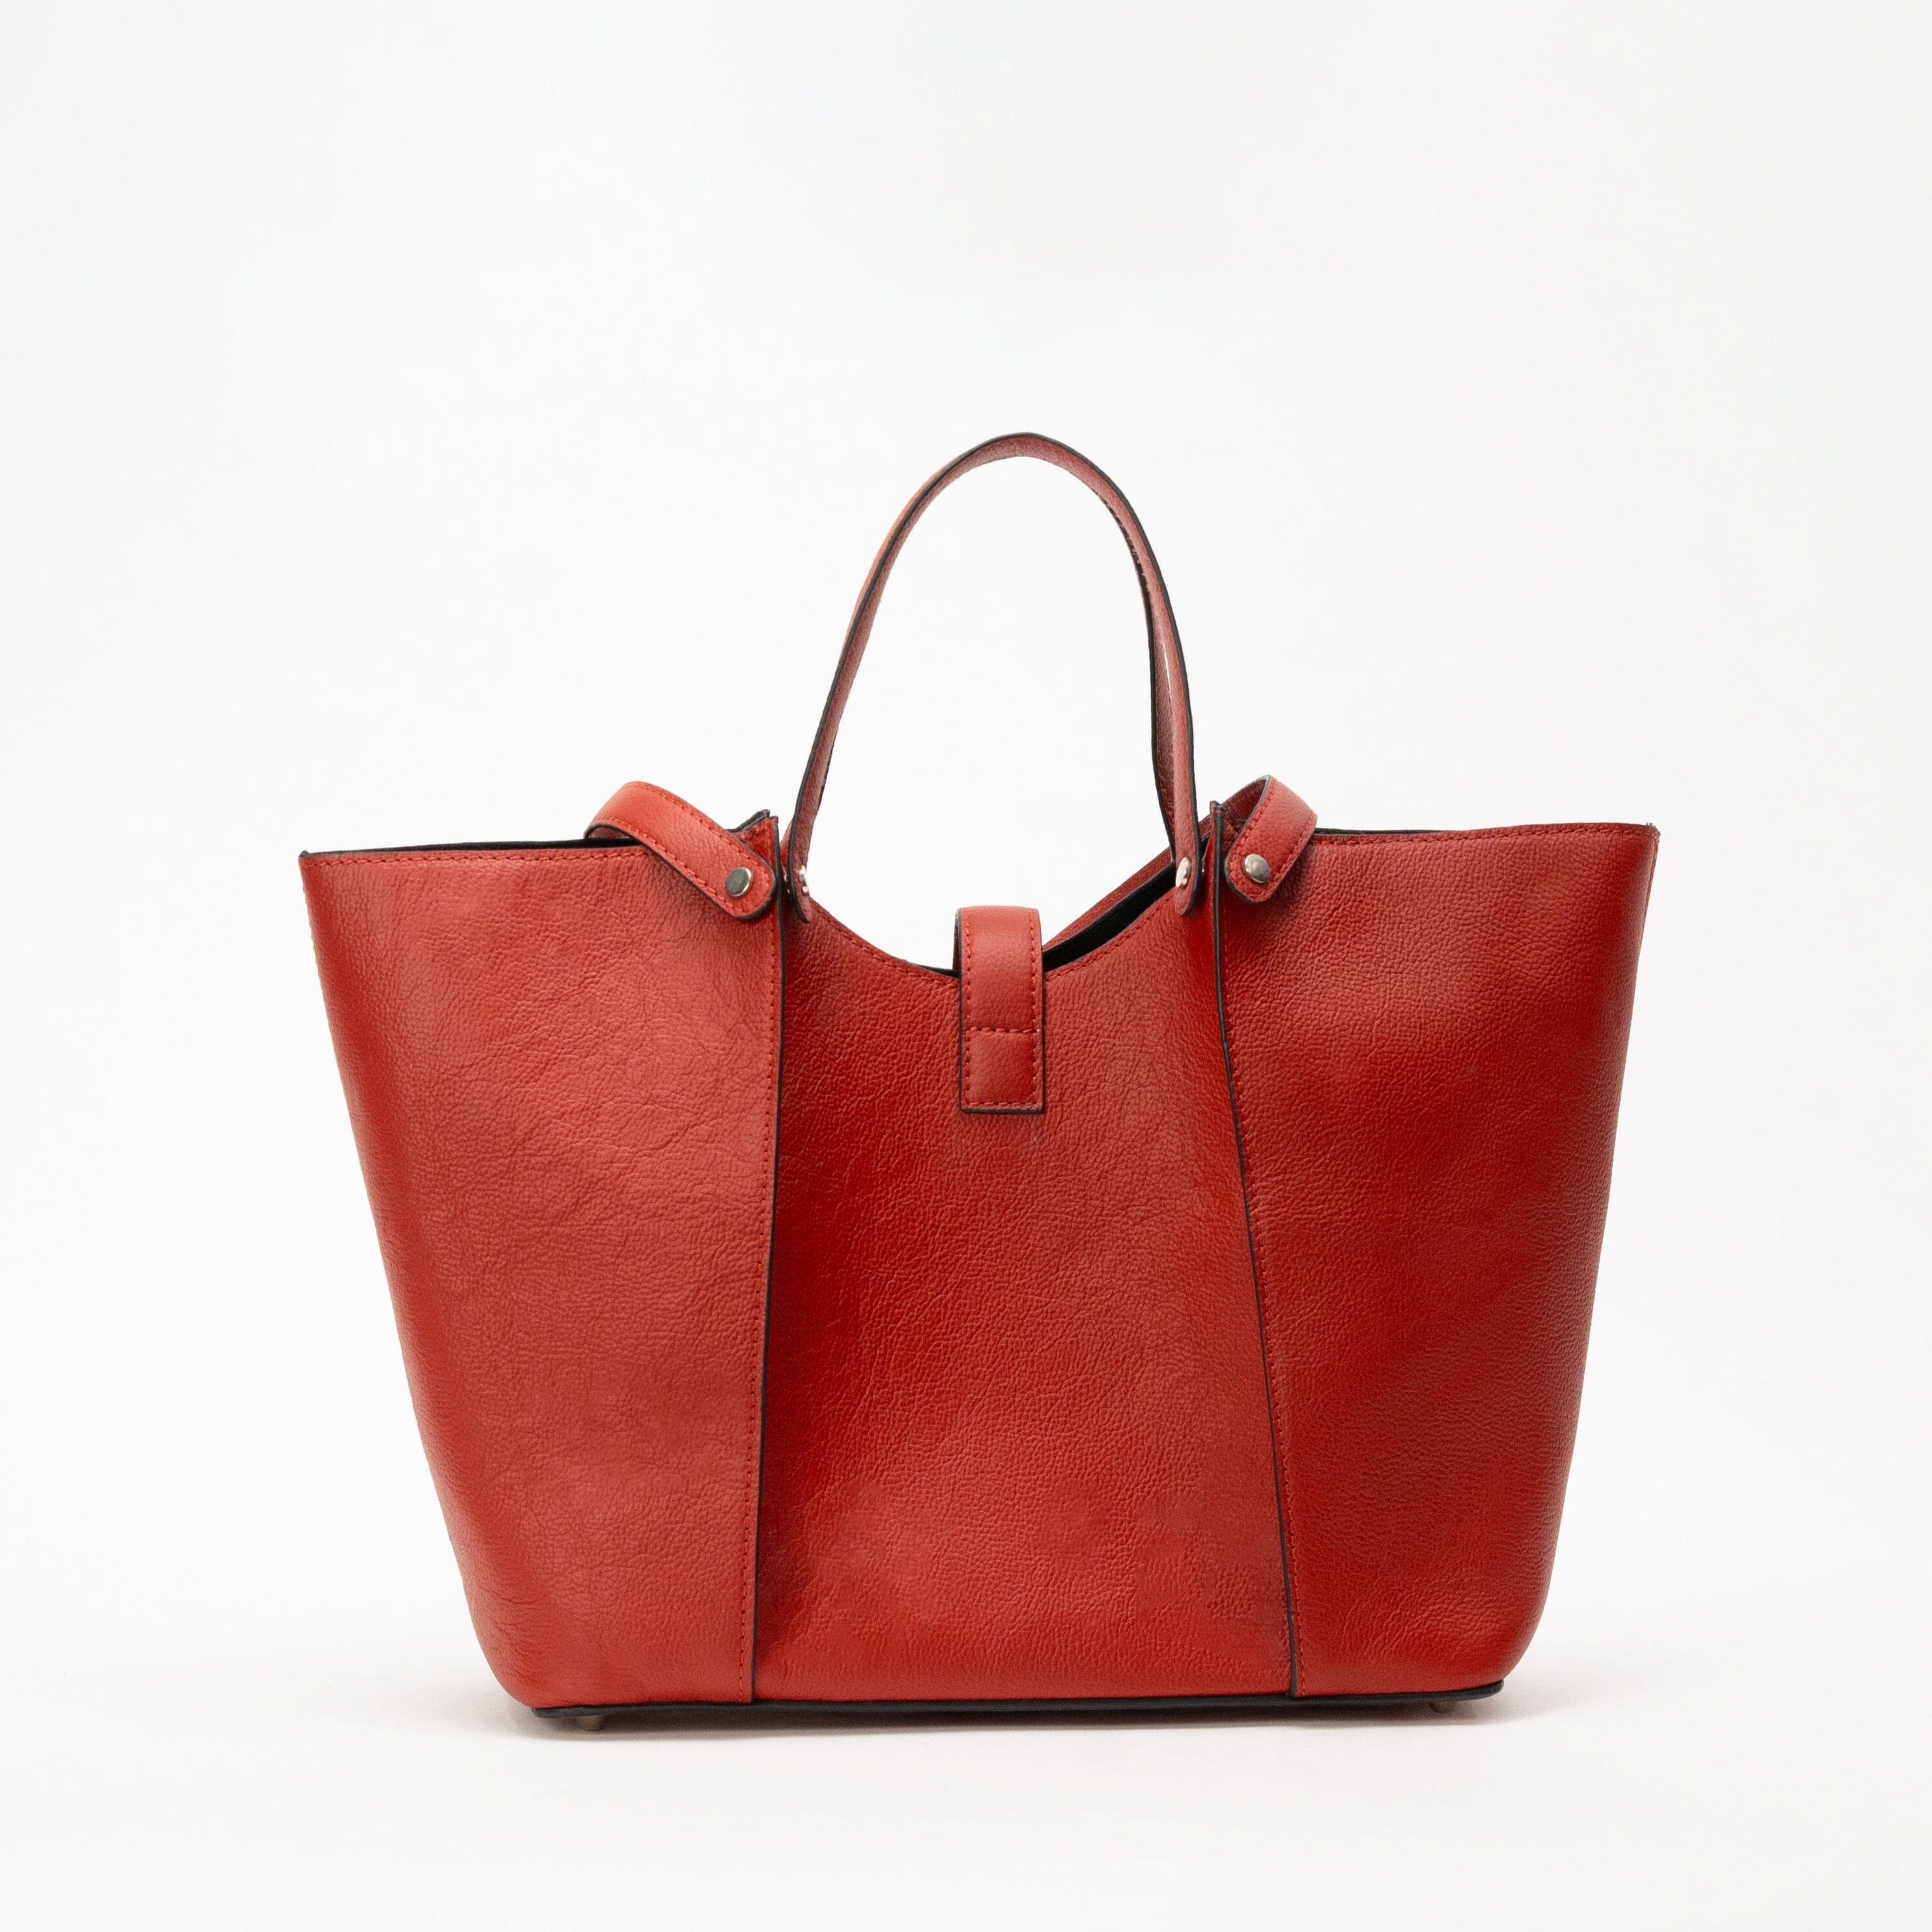 Madison Tote in Scarlet Red